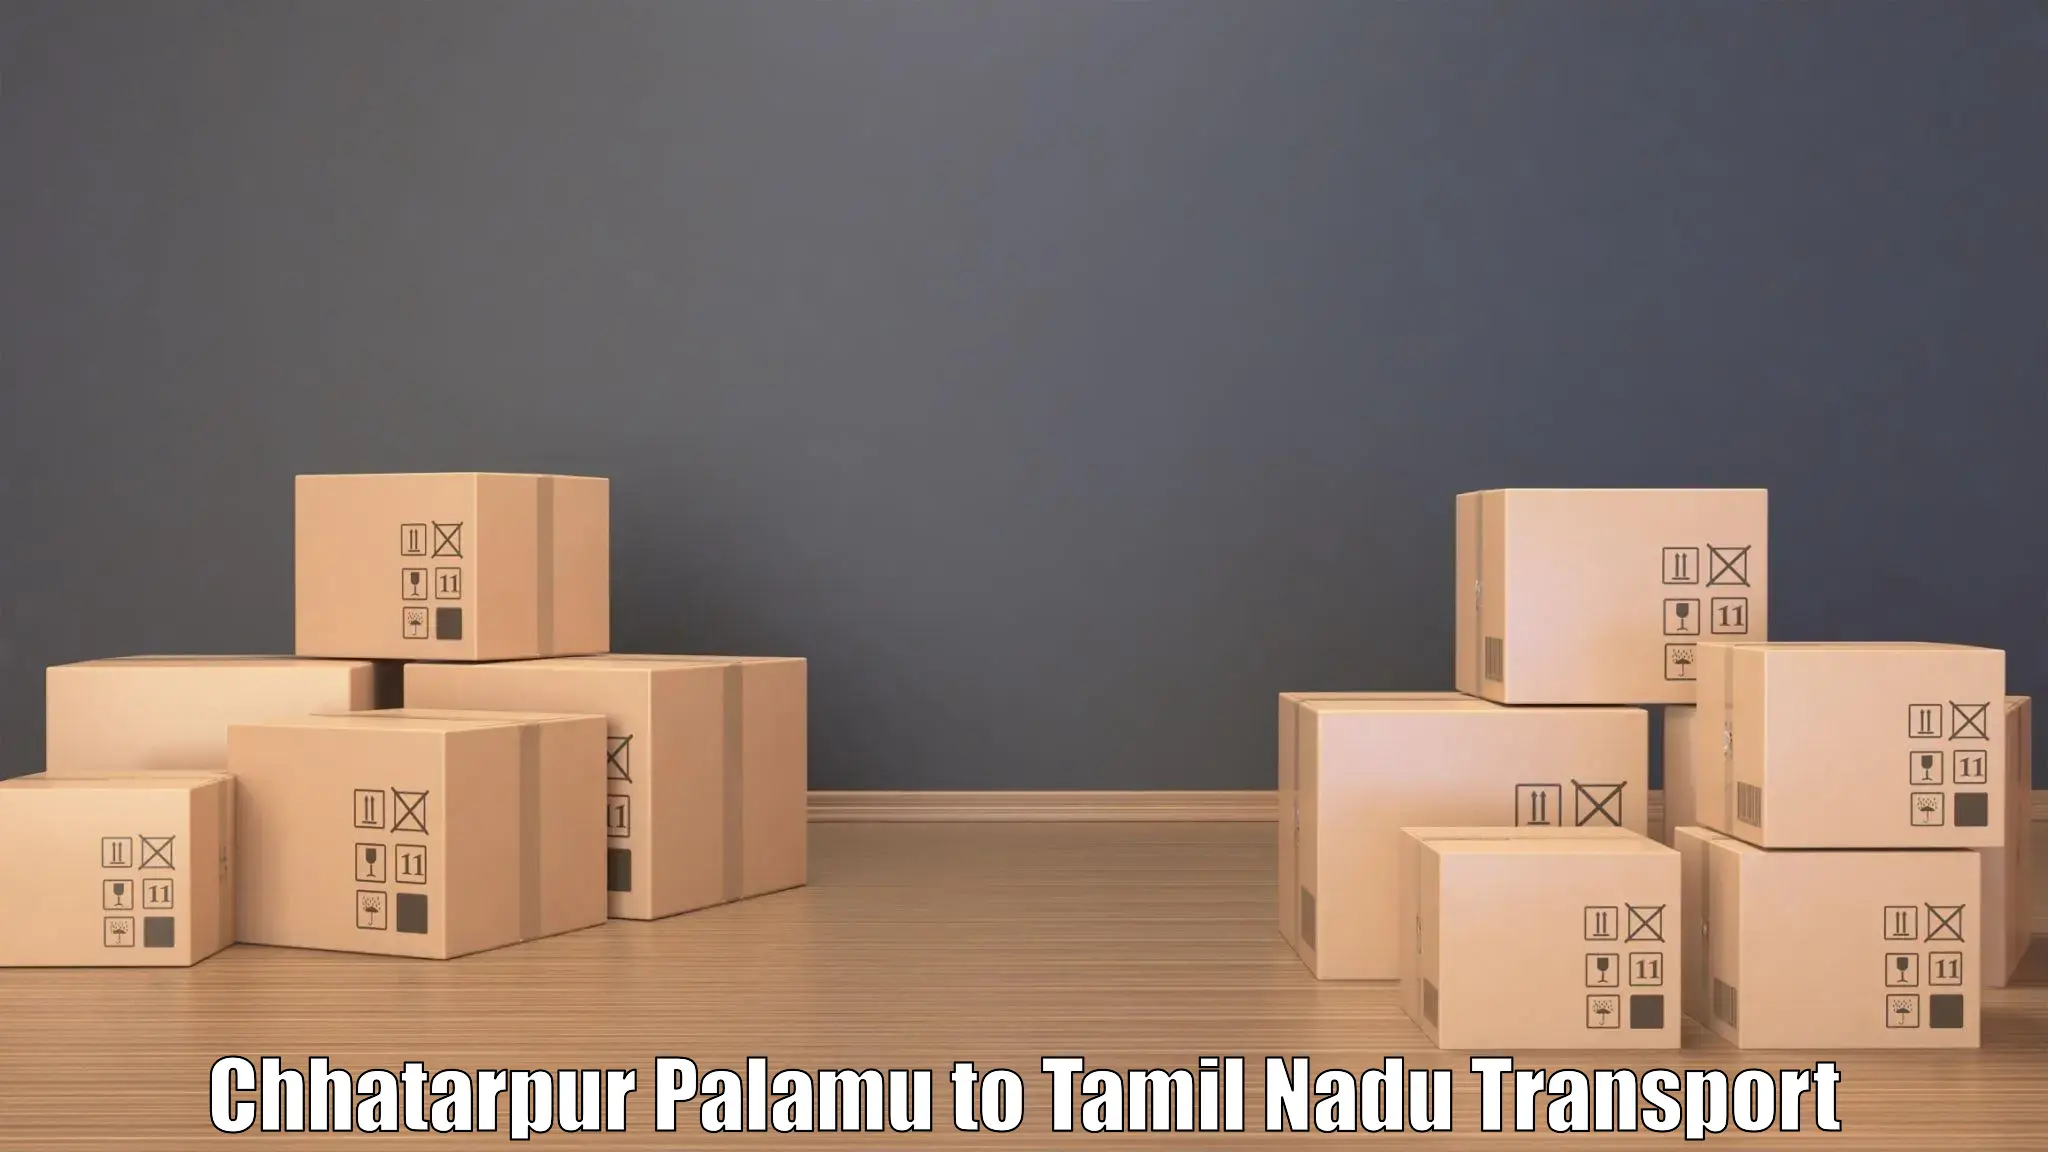 Package delivery services in Chhatarpur Palamu to Tirunelveli